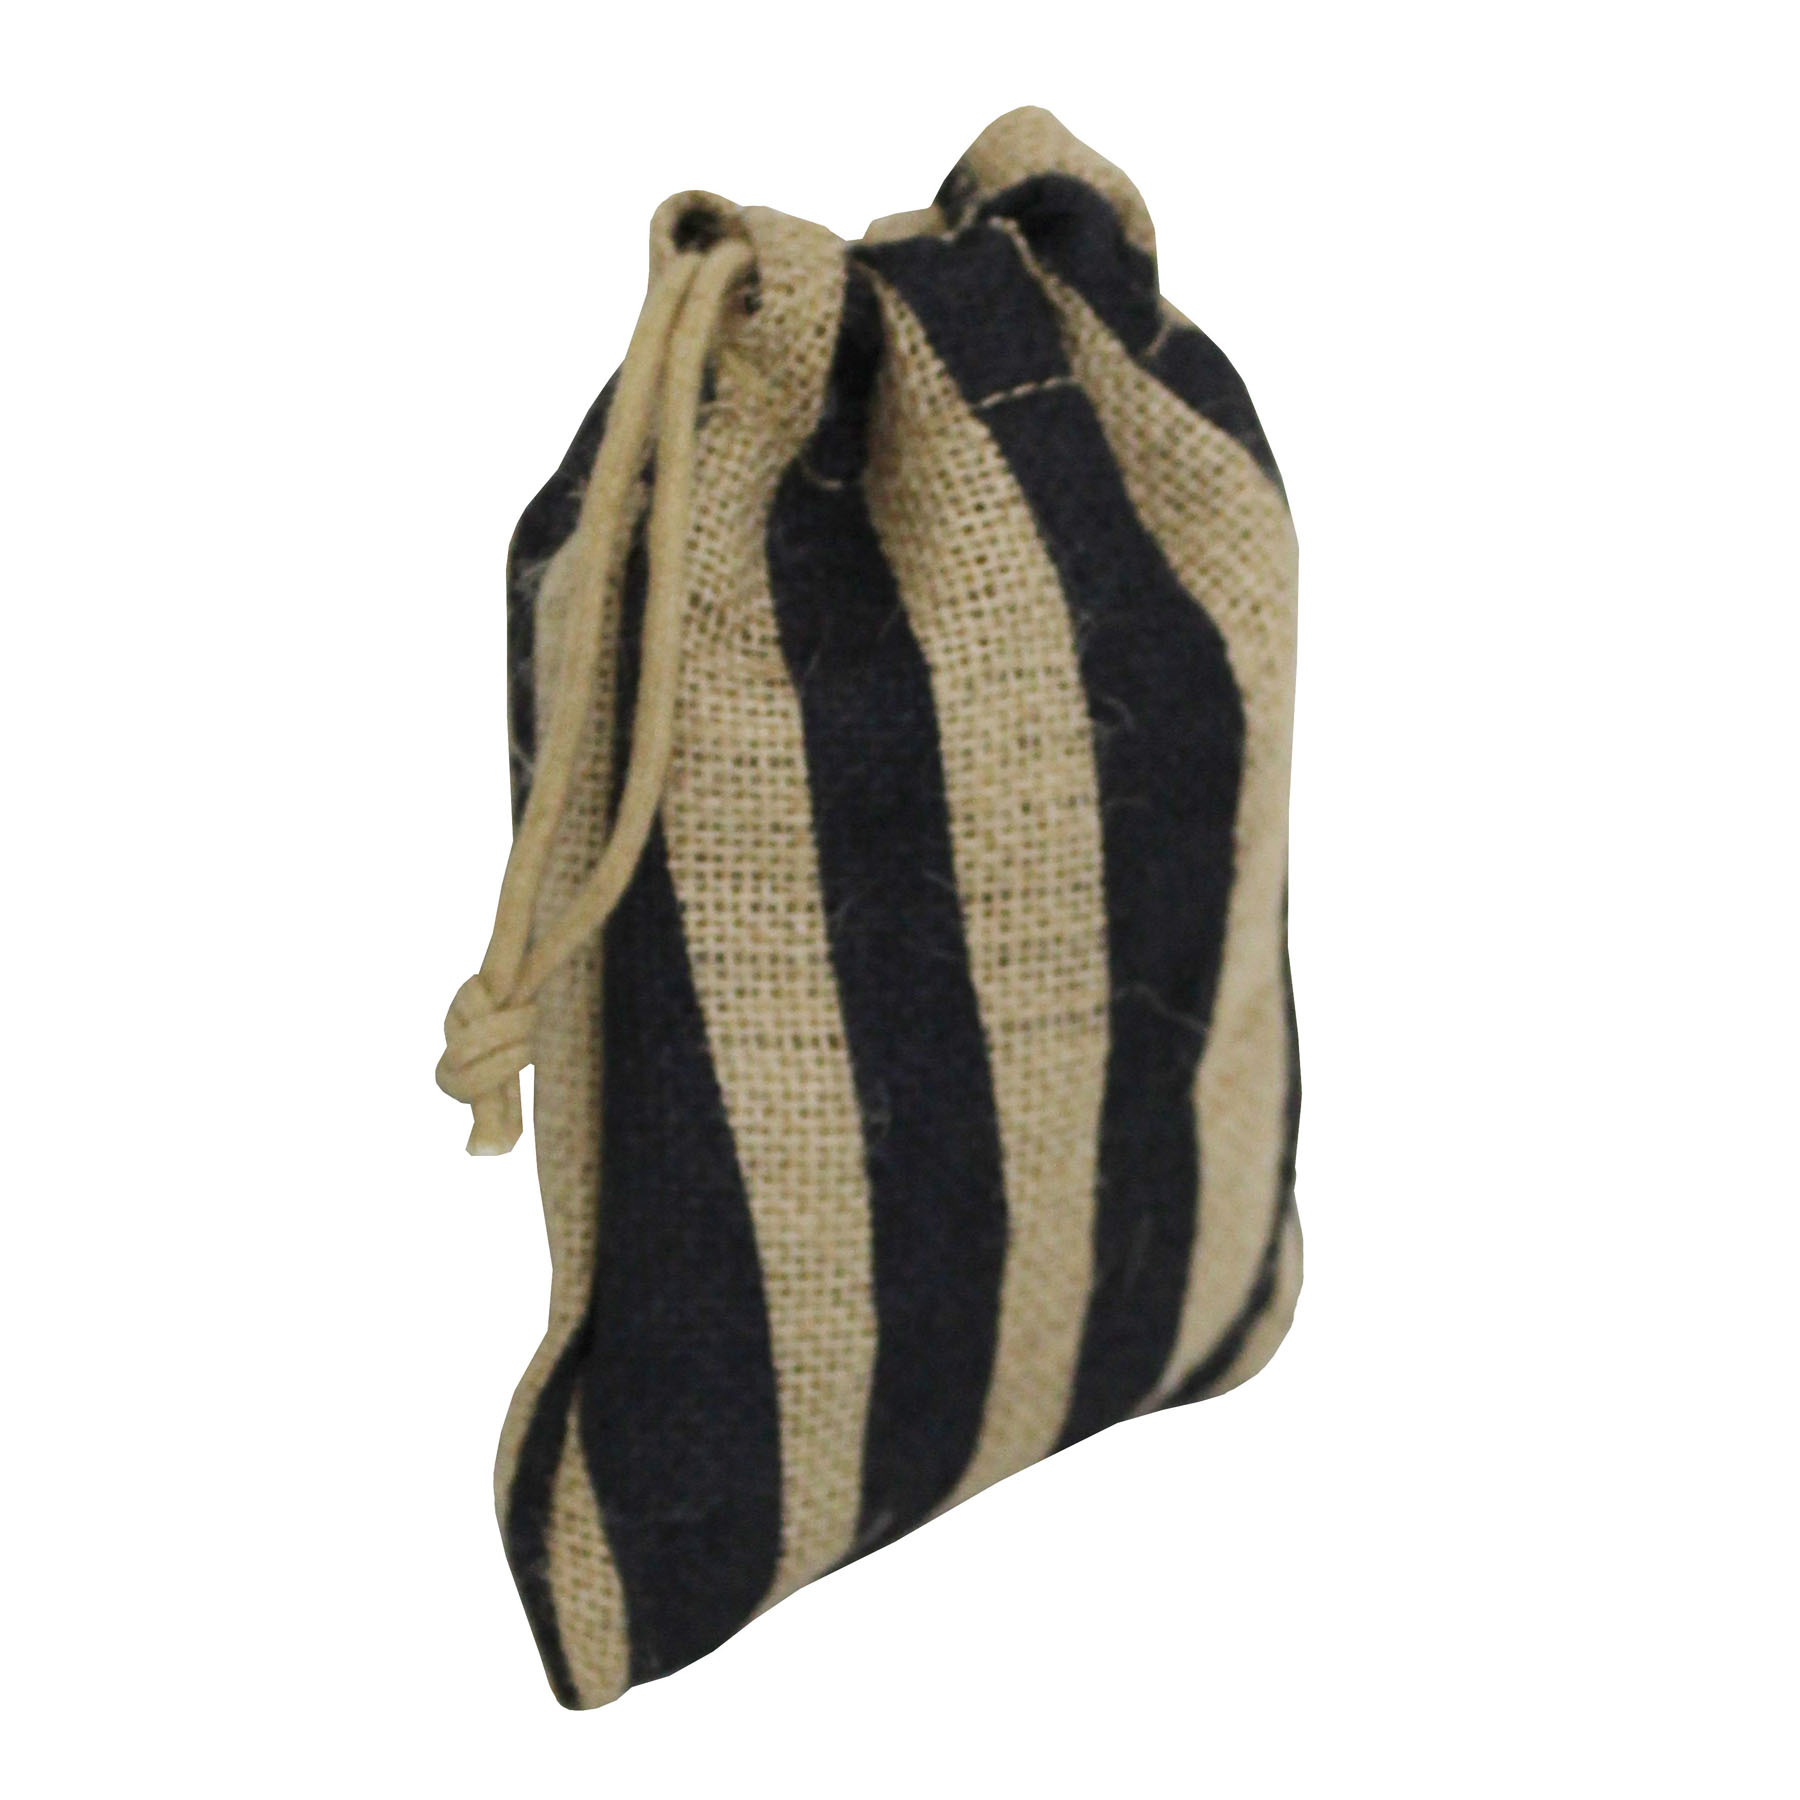 Jute Drawstring Bag With Overall Print